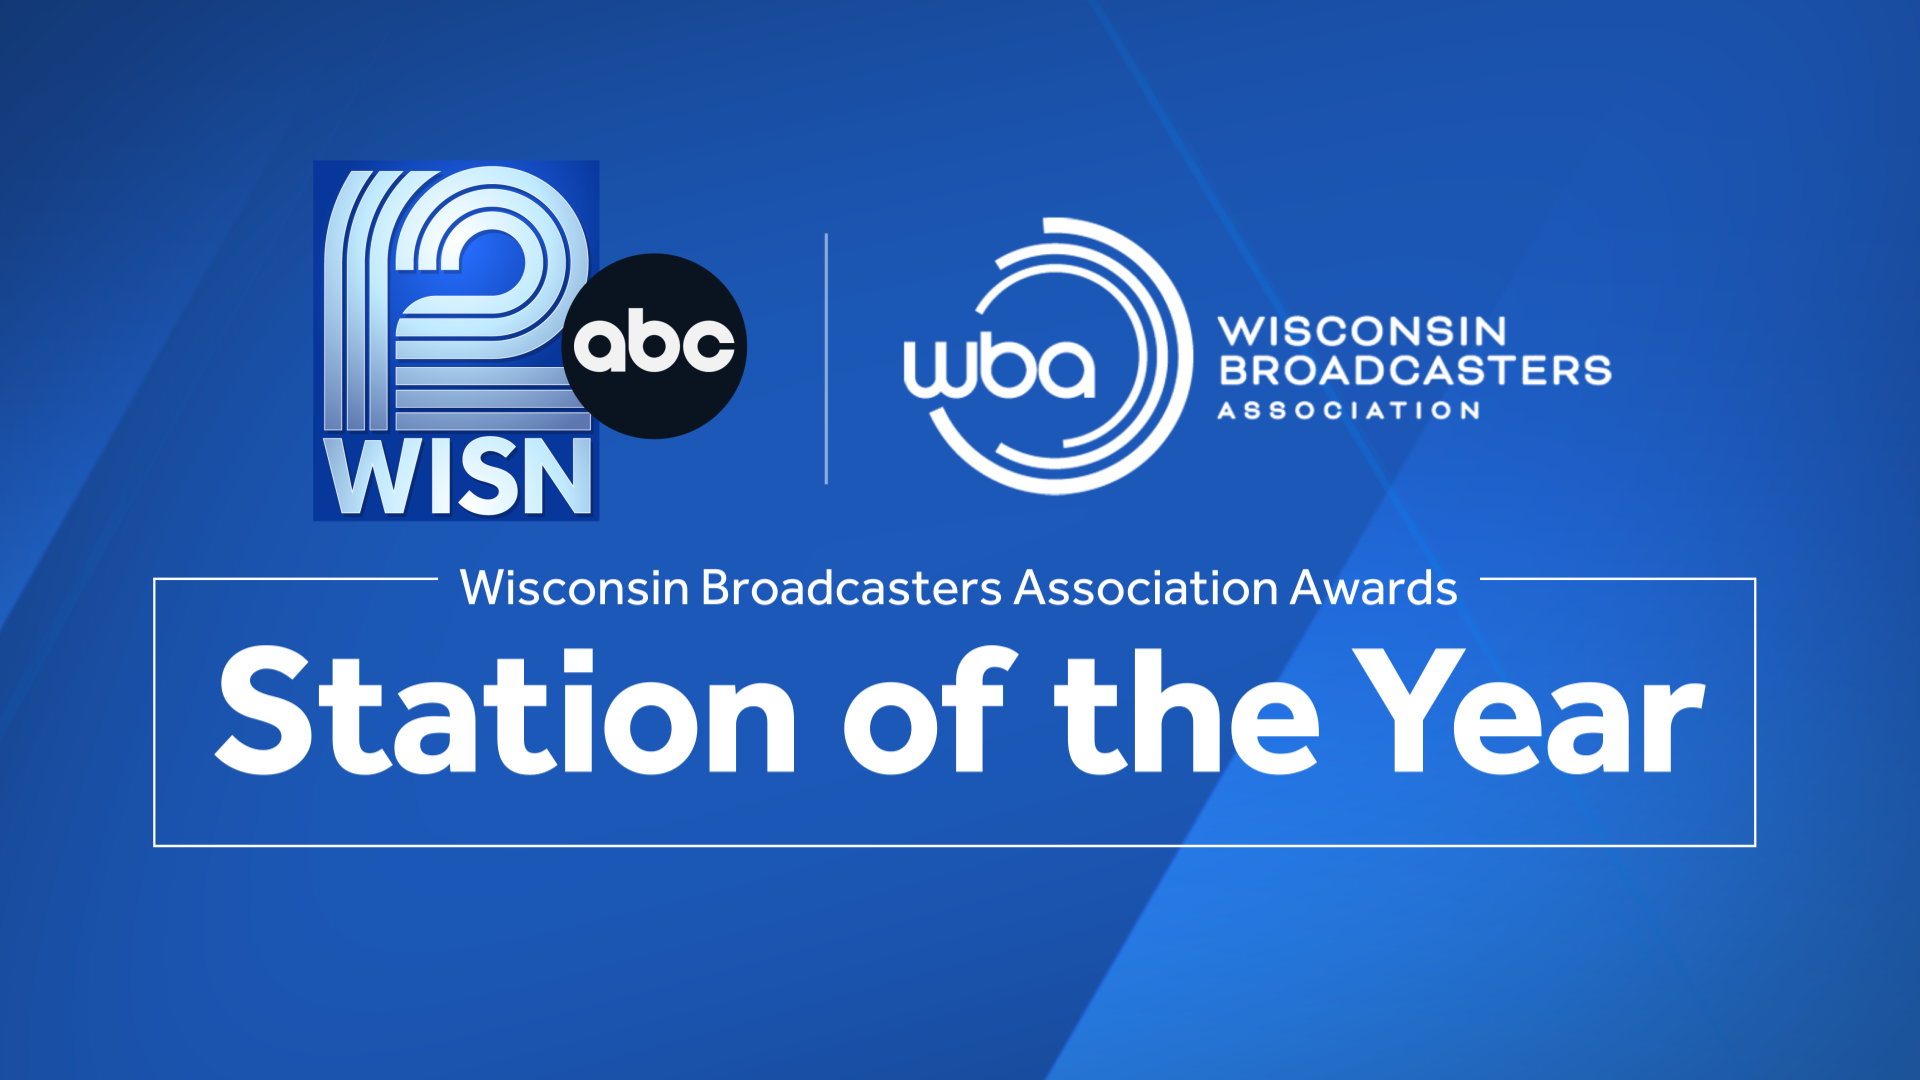 ‘Station of the Year’ Award to WISN 12 by the Wisconsin Broadcasters Association